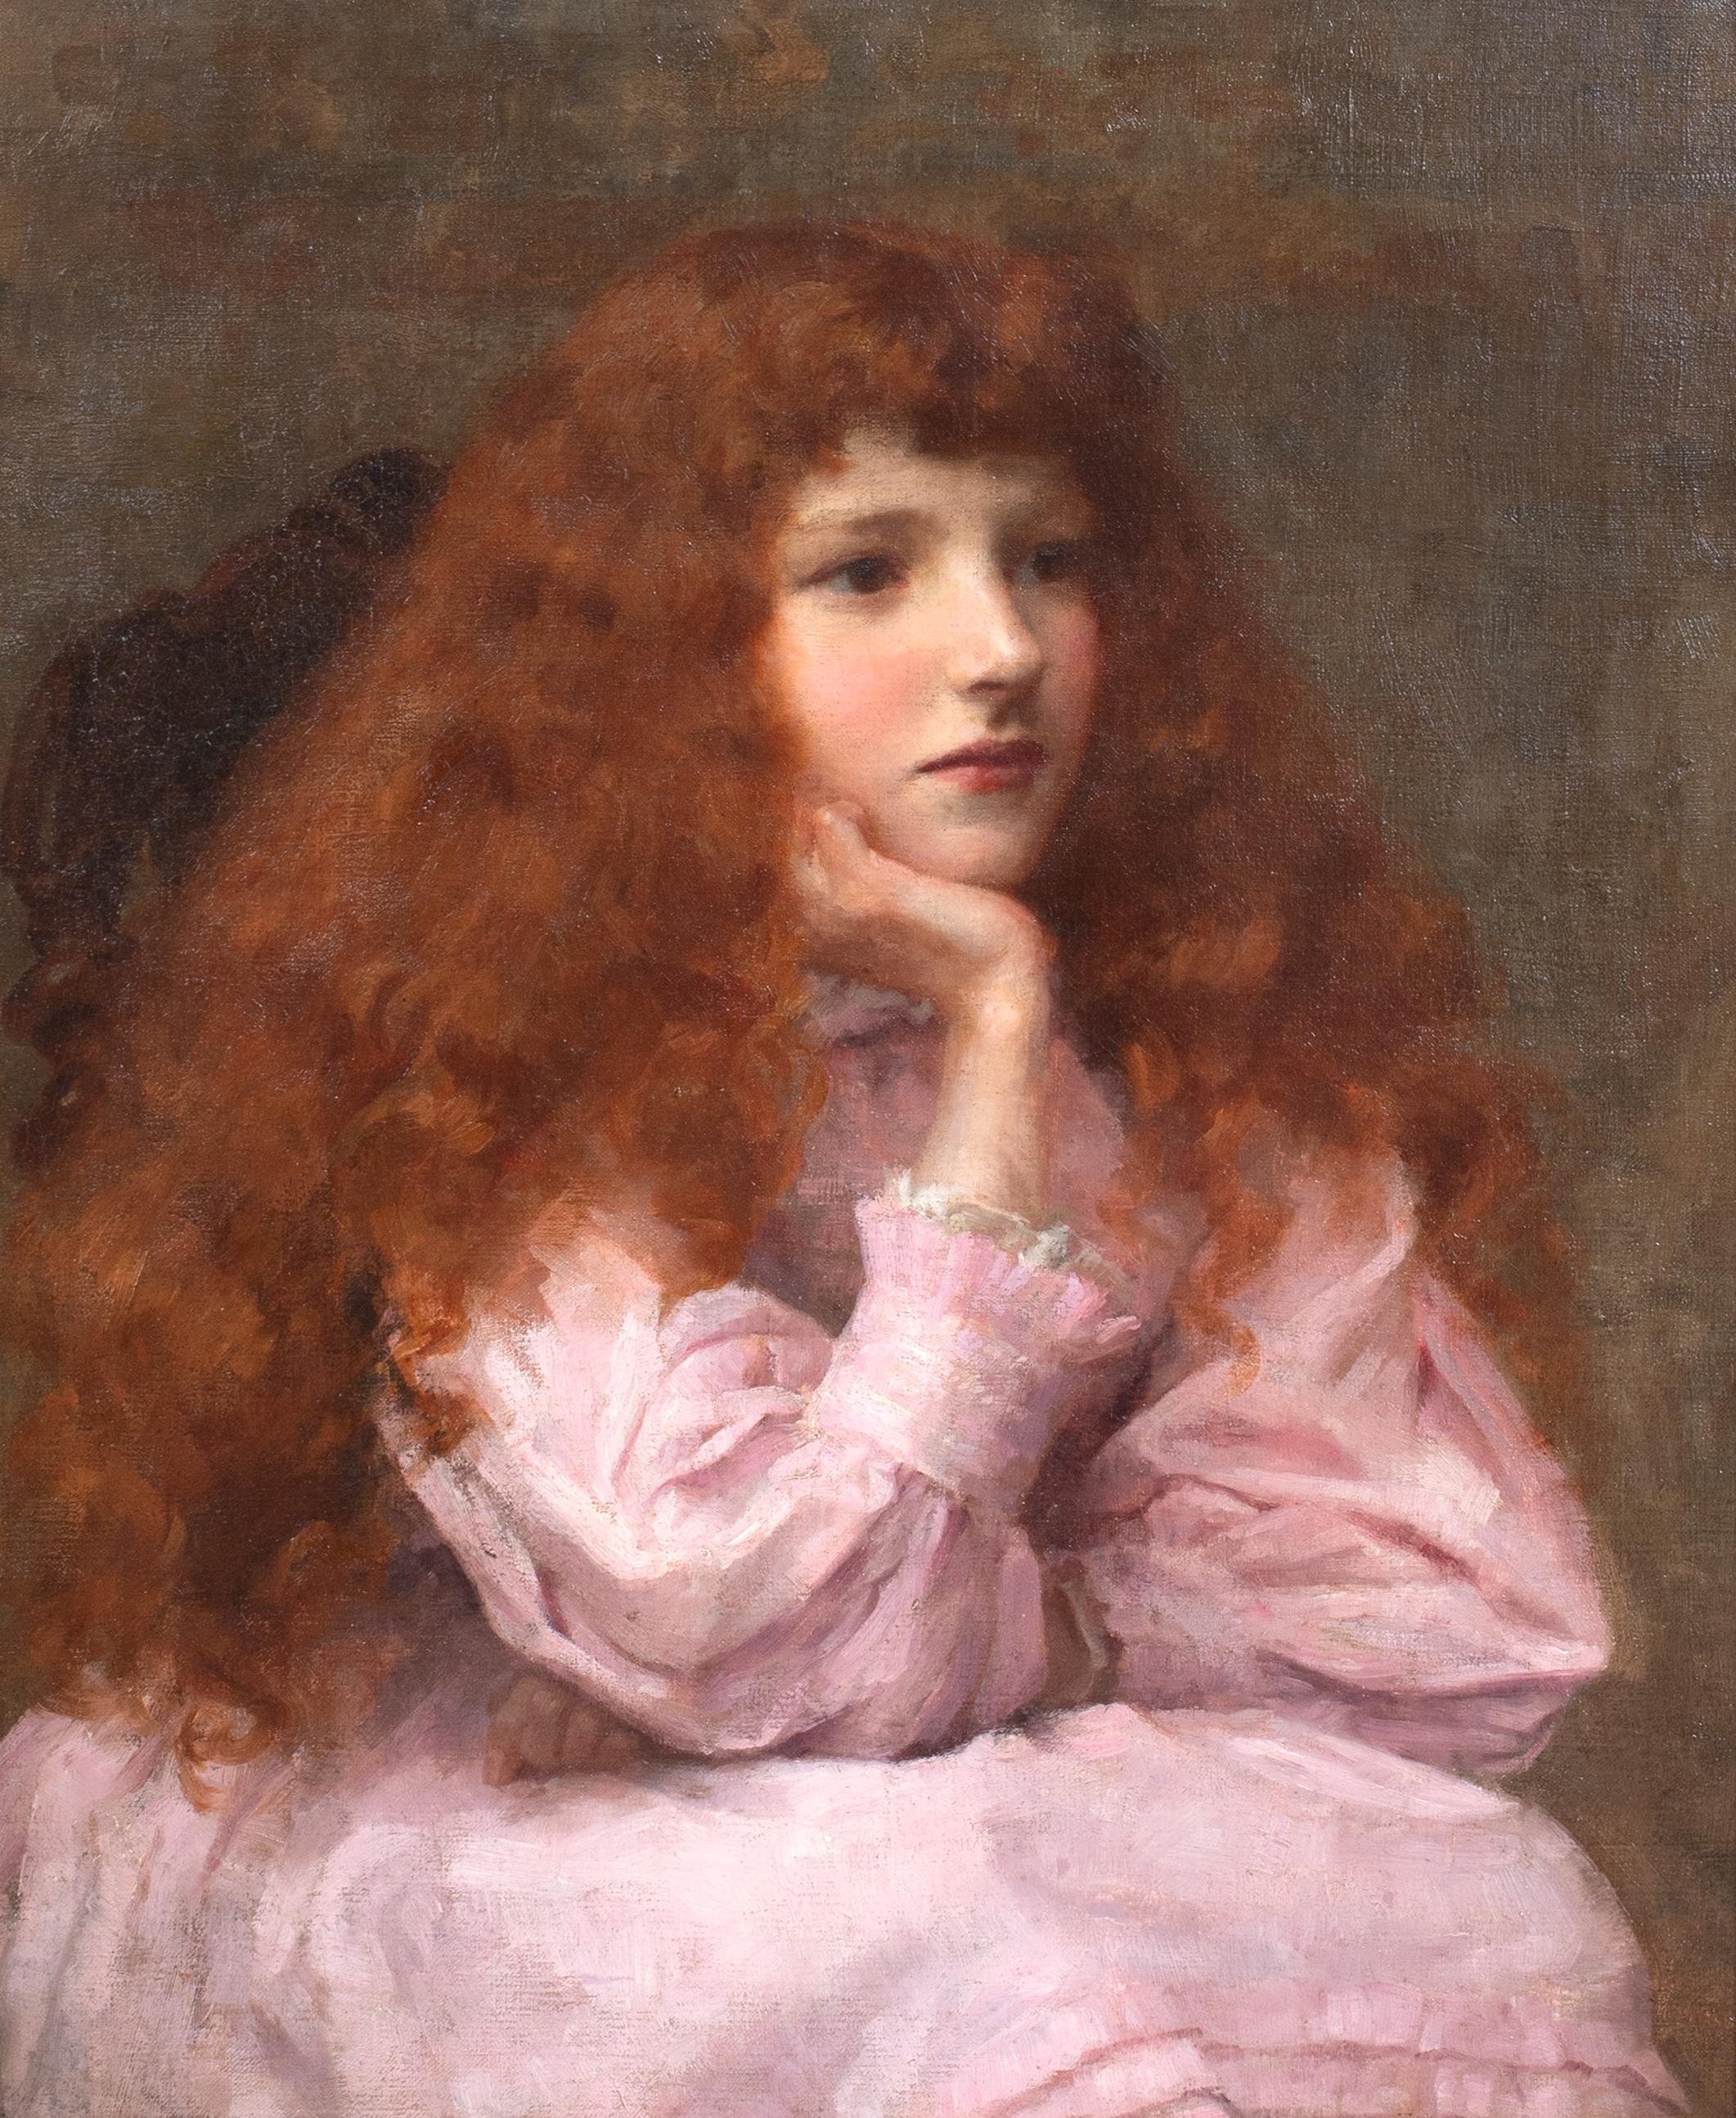 Portrait Of A Redhaired Girl In Pink, 19th Century

George Sheridan KNOWLES (1863-1931)

Large 19th century portrait of a redhaired girl wearing a pink dress, oil on canvas by George Sheridan Knowles. Excellent quality and condition portrait of the